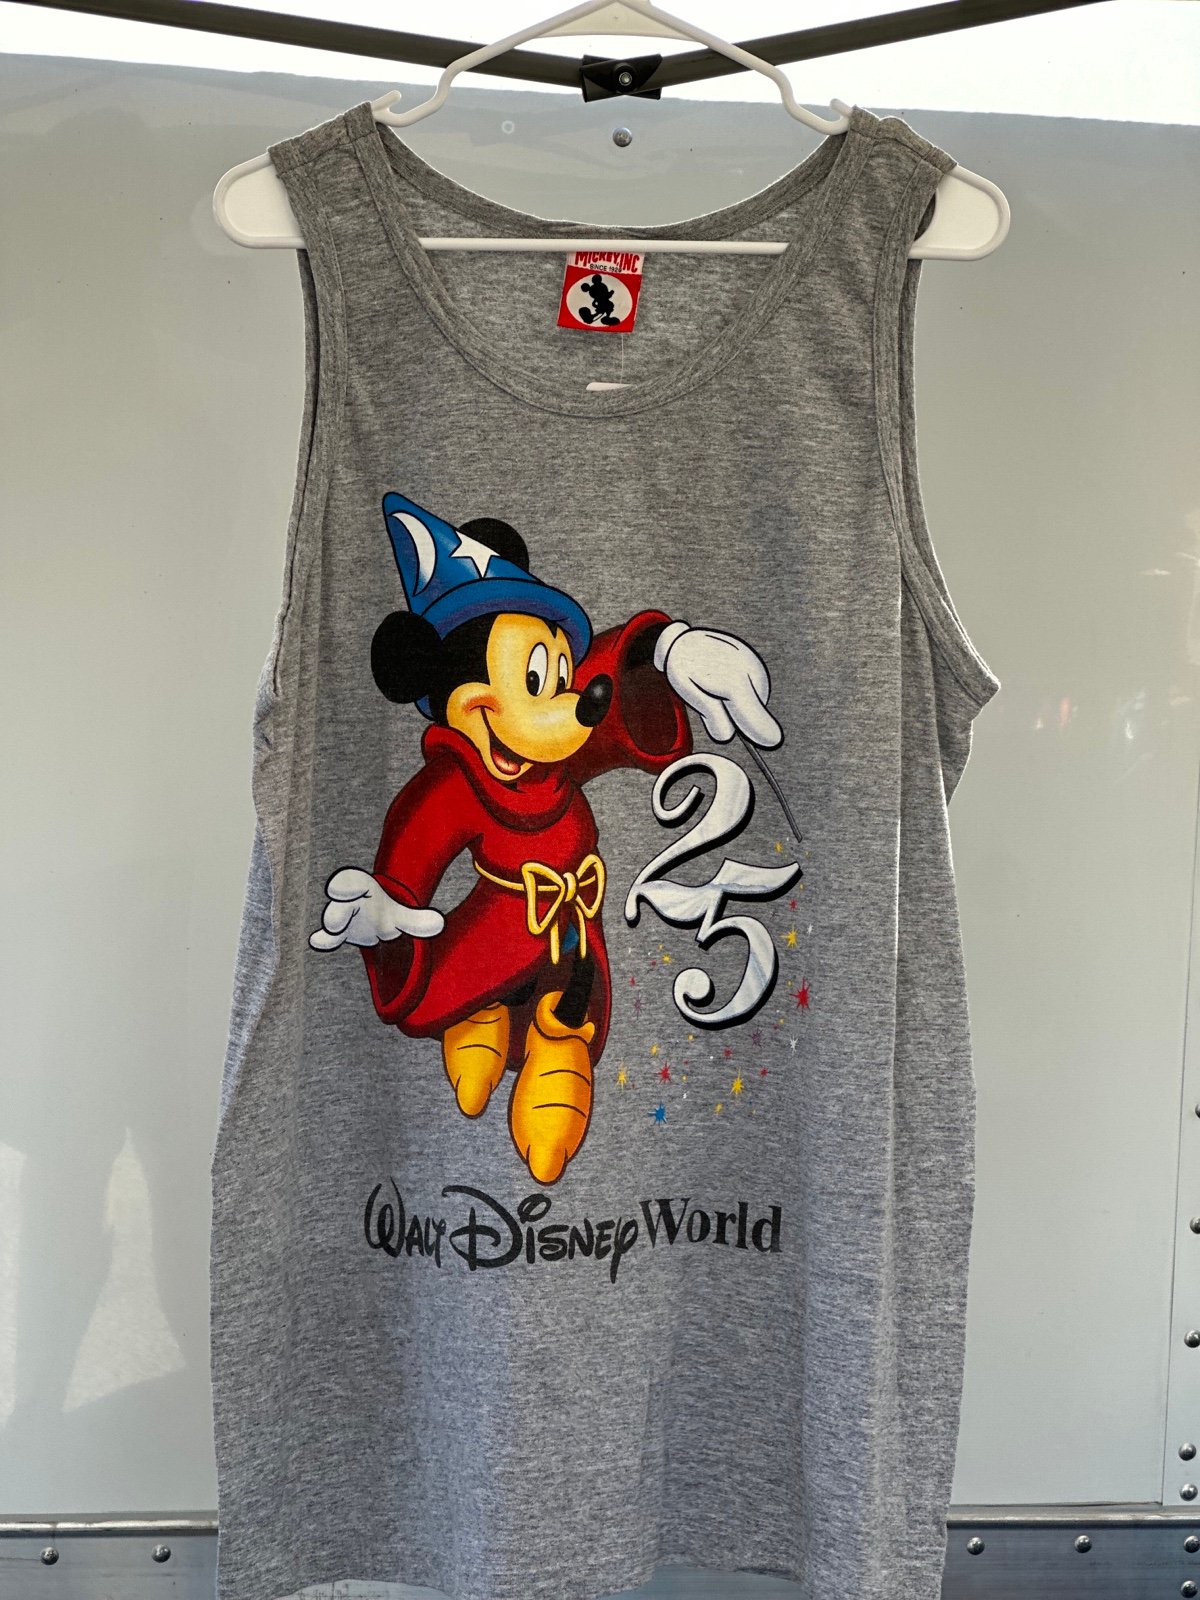 Promotions  Magic Mickey tank top pHOAr8k4g New Style